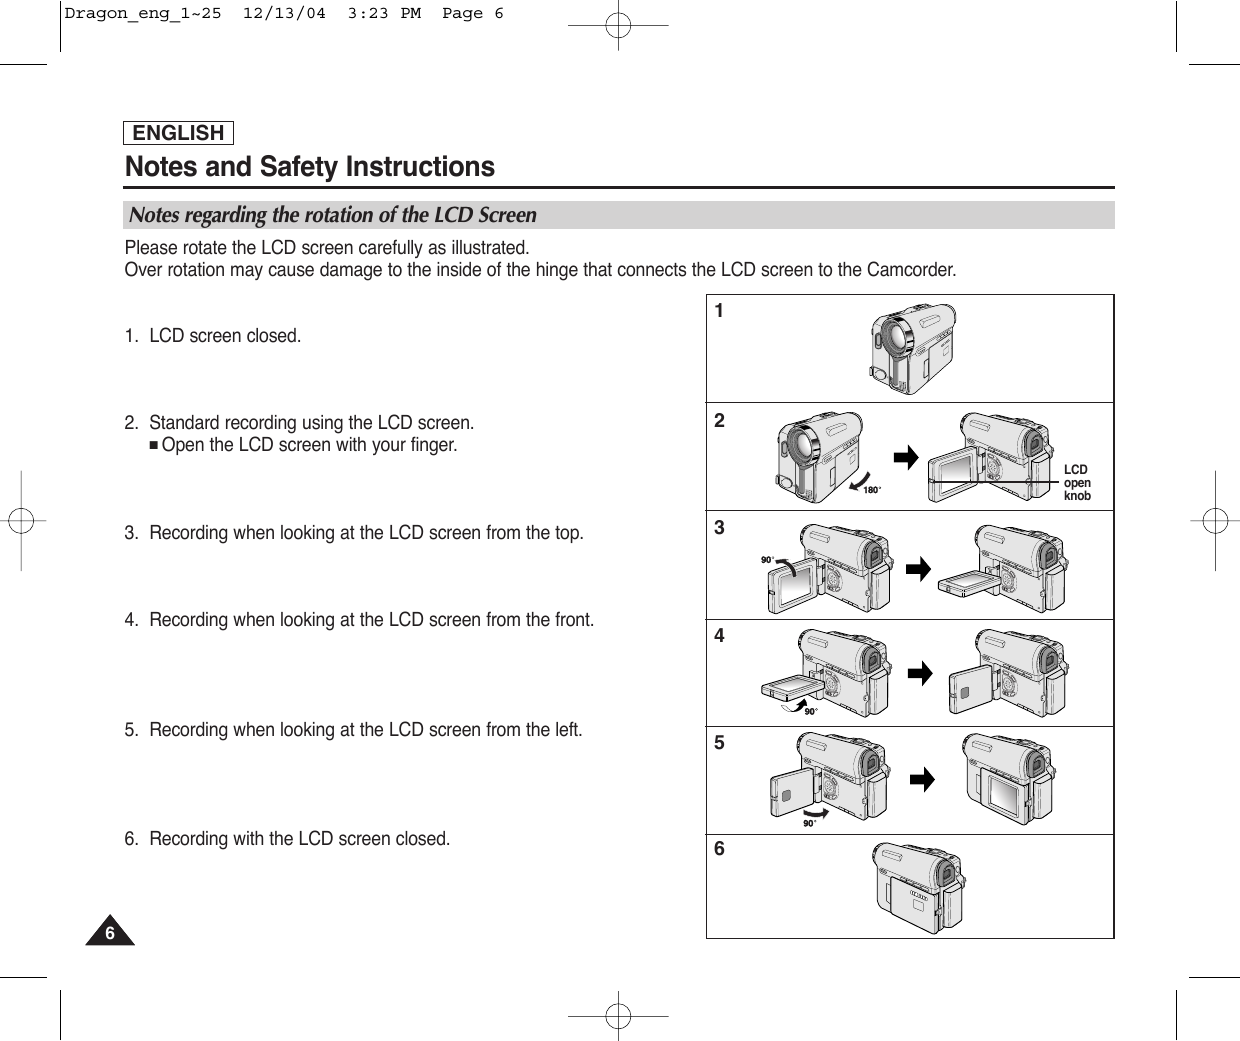 ENGLISHNotes and Safety Instructions66Notes regarding the rotation of the LCD ScreenPlease rotate the LCD screen carefully as illustrated. Over rotation may cause damage to the inside of the hinge that connects the LCD screen to the Camcorder.1. LCD screen closed.2. Standard recording using the LCD screen.■Open the LCD screen with your finger.3. Recording when looking at the LCD screen from the top.4. Recording when looking at the LCD screen from the front.5. Recording when looking at the LCD screen from the left.6. Recording with the LCD screen closed.123456LCDopenknobDragon_eng_1~25  12/13/04  3:23 PM  Page 6